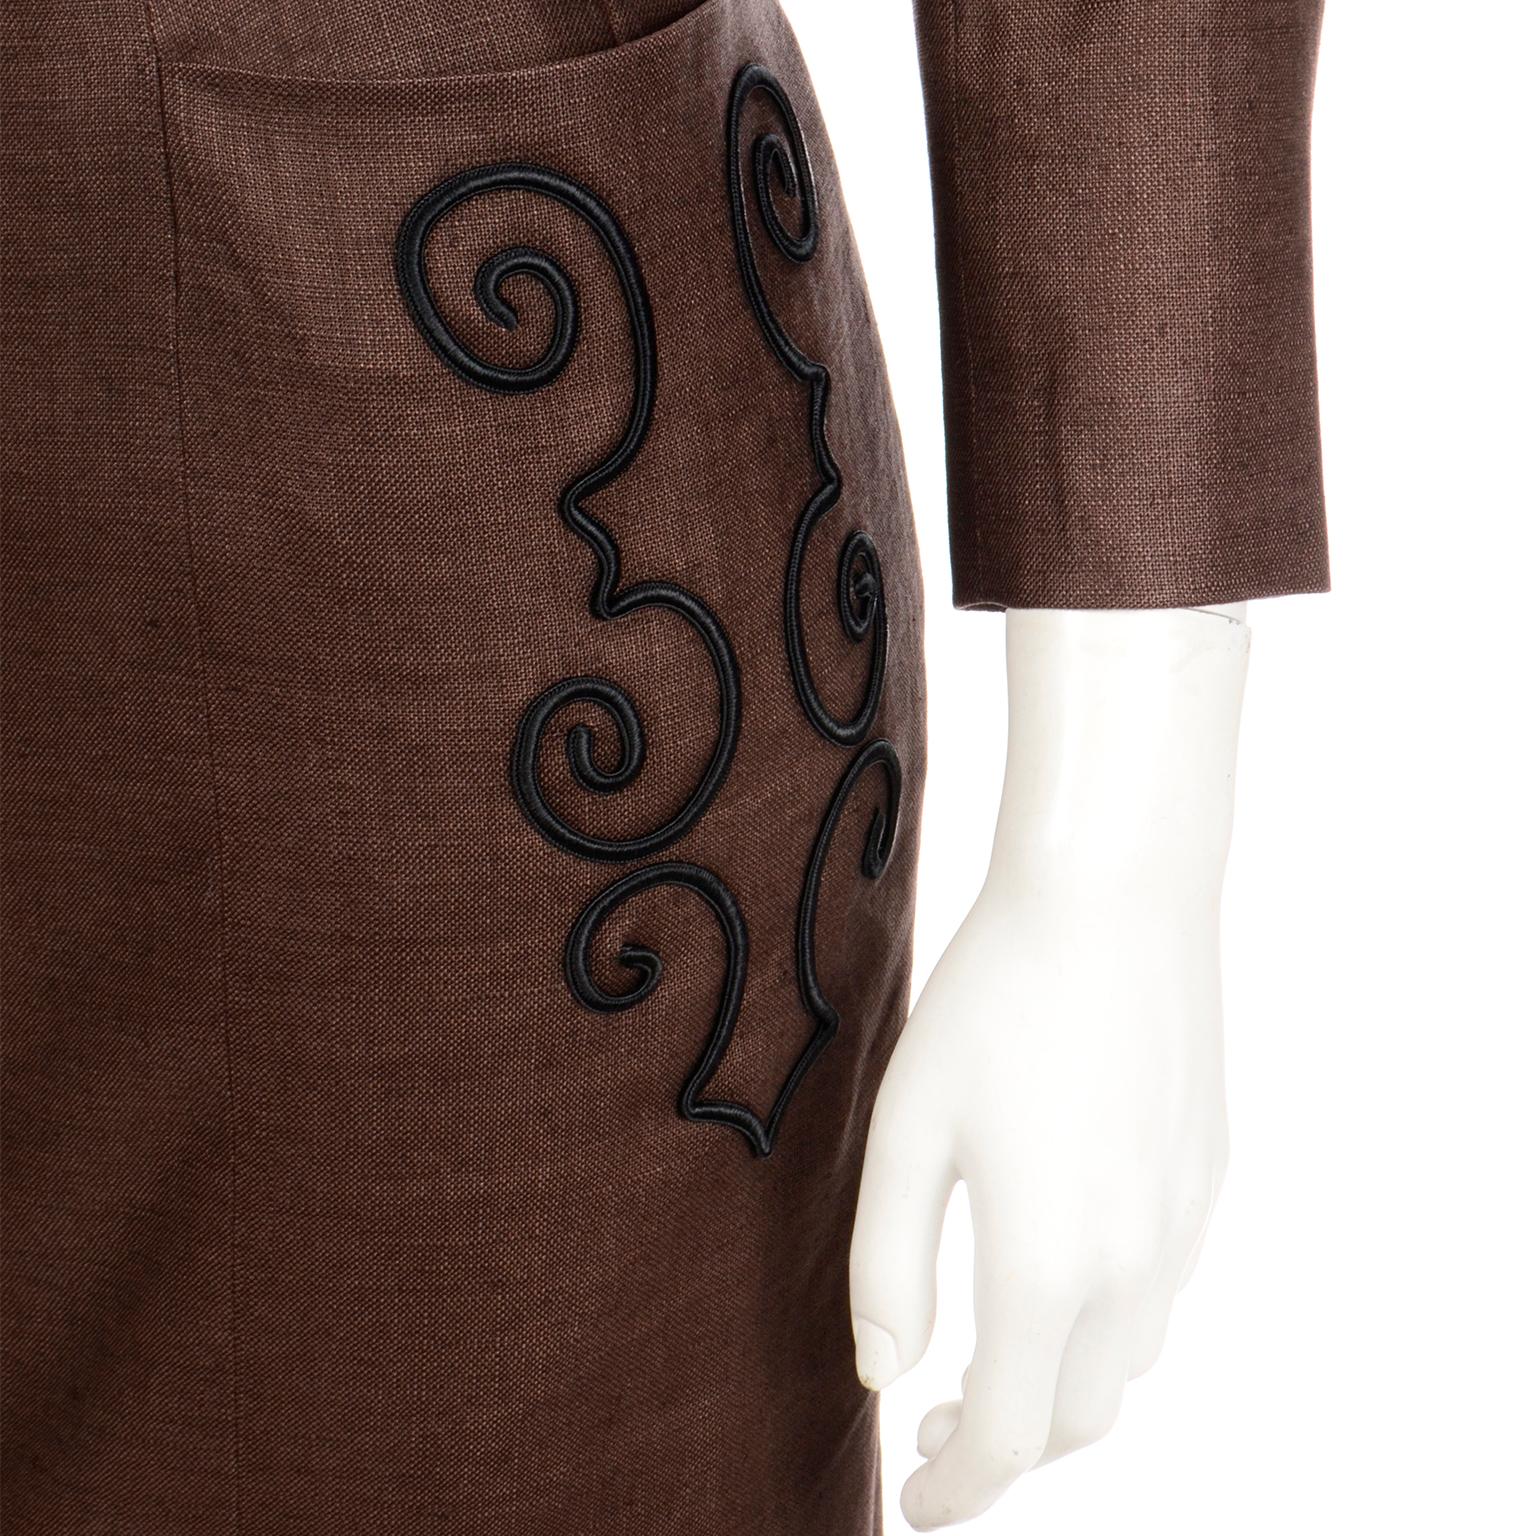 Yves Saint Laurent Brown Linen Blend Embroidered Cropped Jacket & Skirt Suit For Sale 3